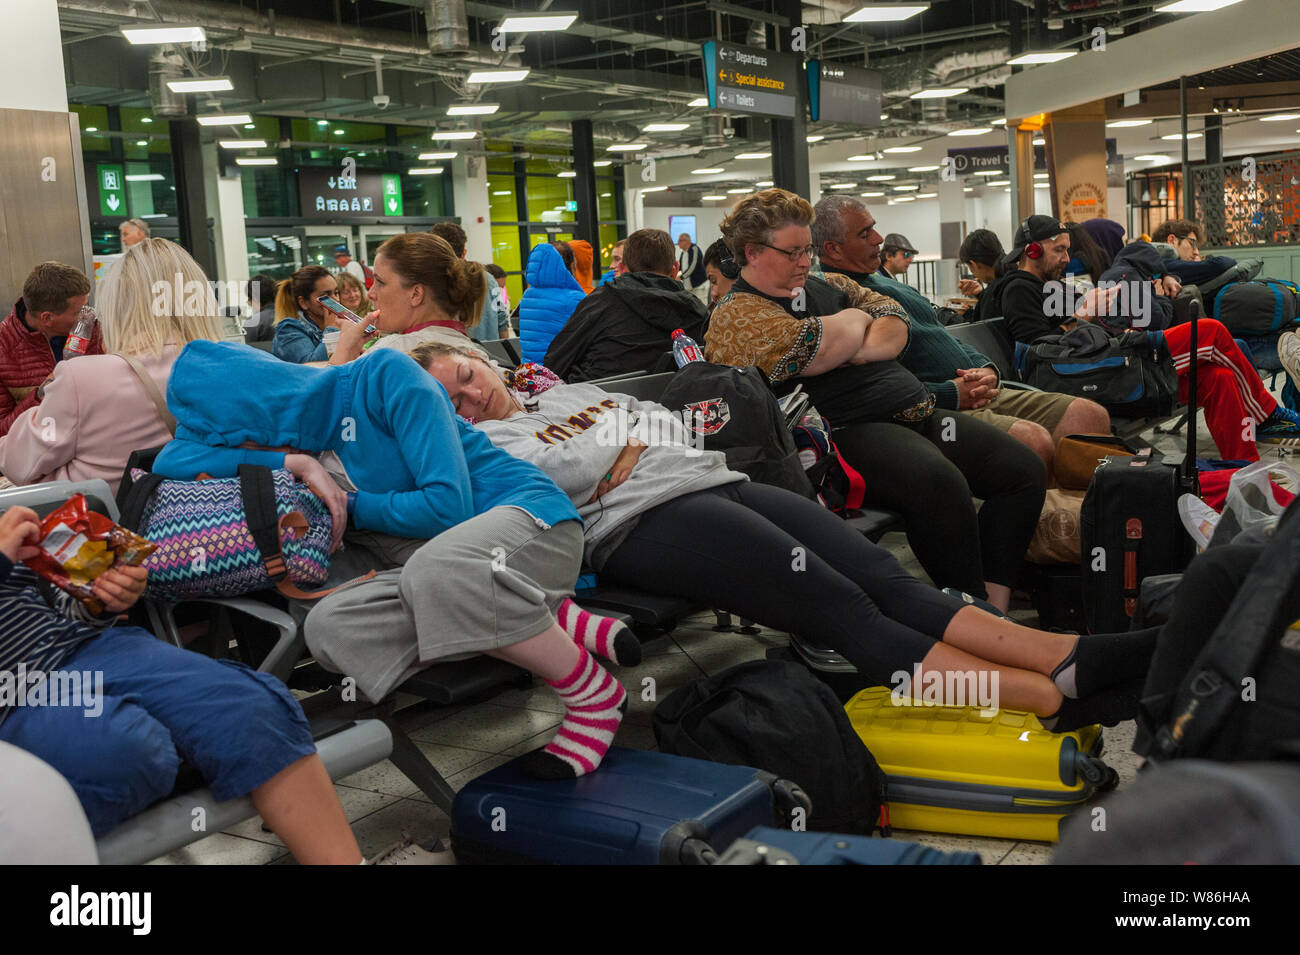 London Luton Airport, people waiting for a delay Stock Photo